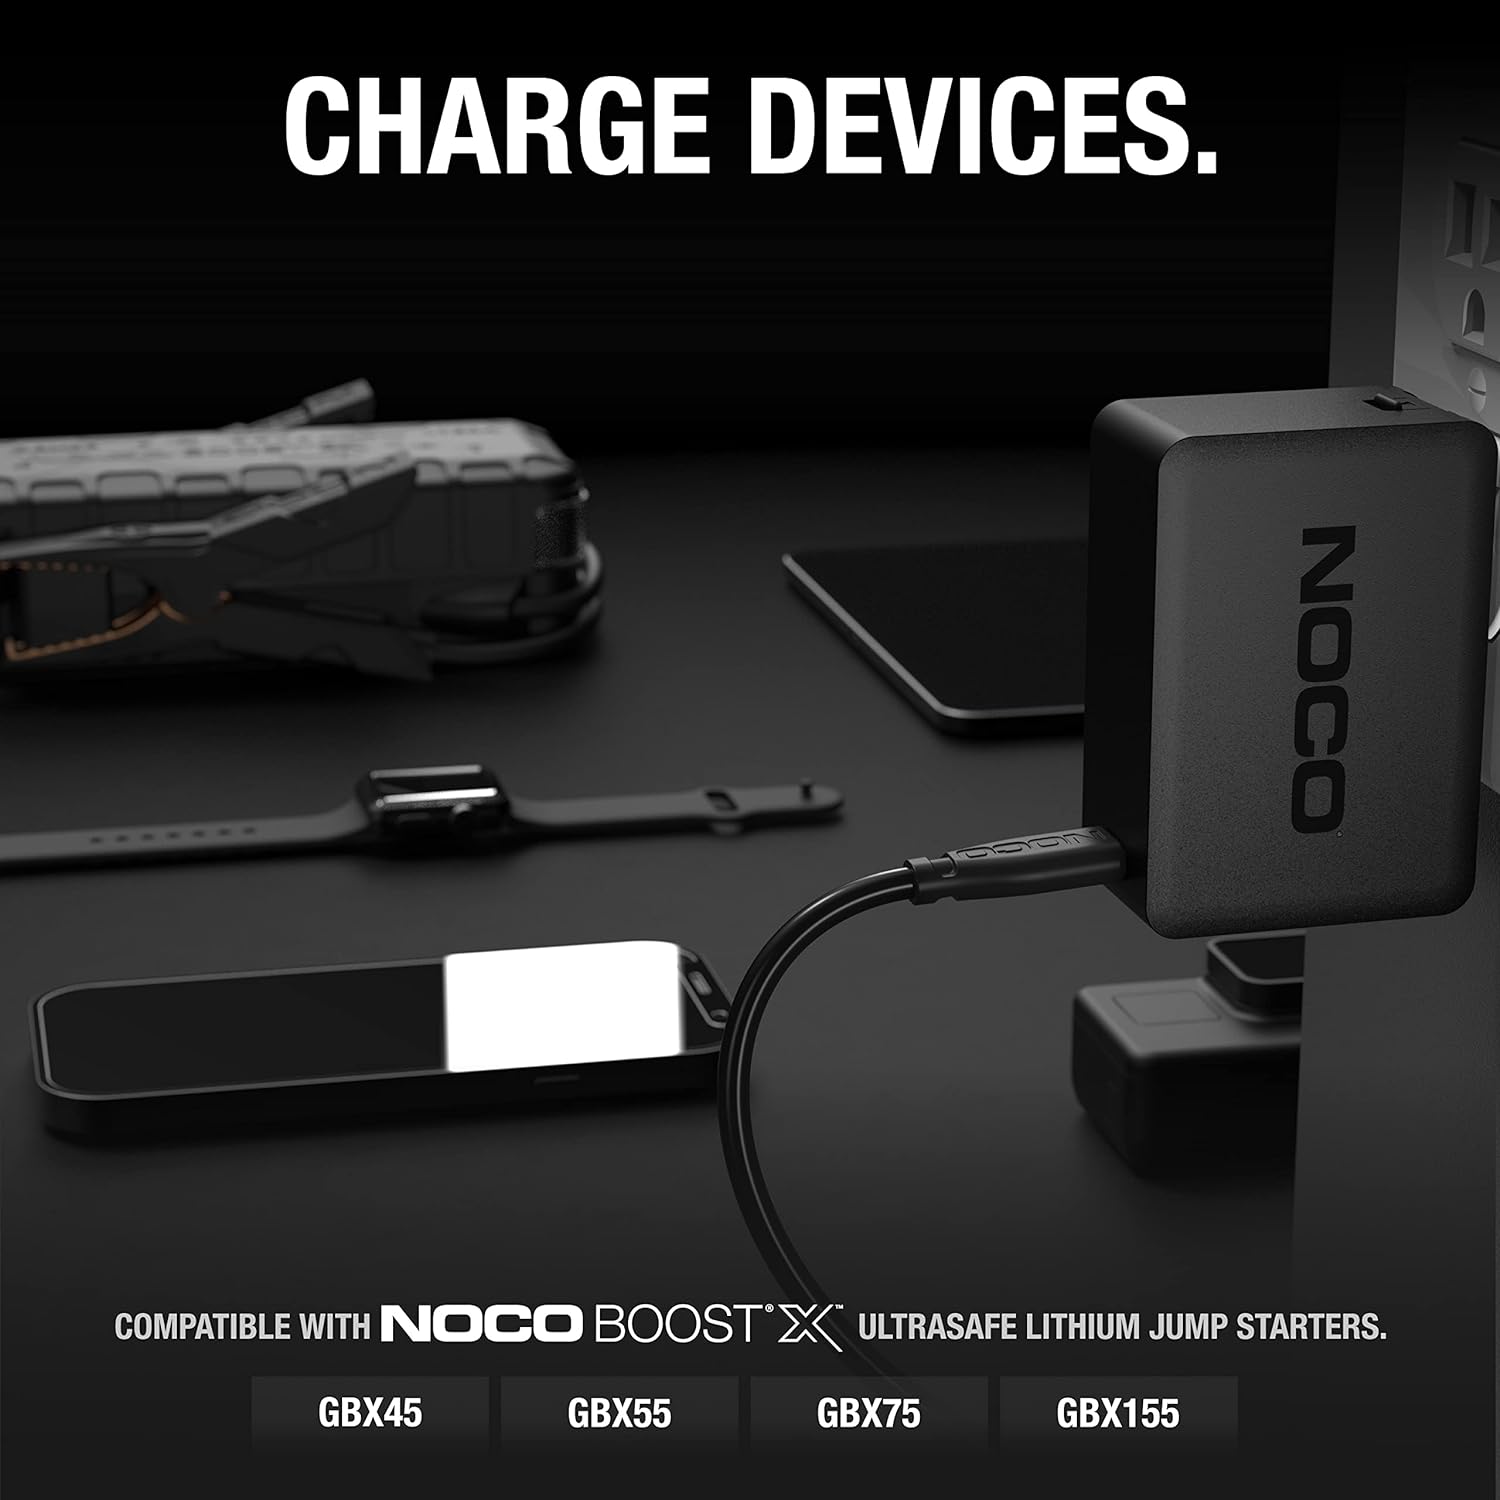 NOCO U65 65W USB-C Charger, Power Delivery (PD) Fast Portable Micro Wall Charger and International Travel Charger with Interchangeable Plugs for Apple, Google, Samsung, Microsoft and More